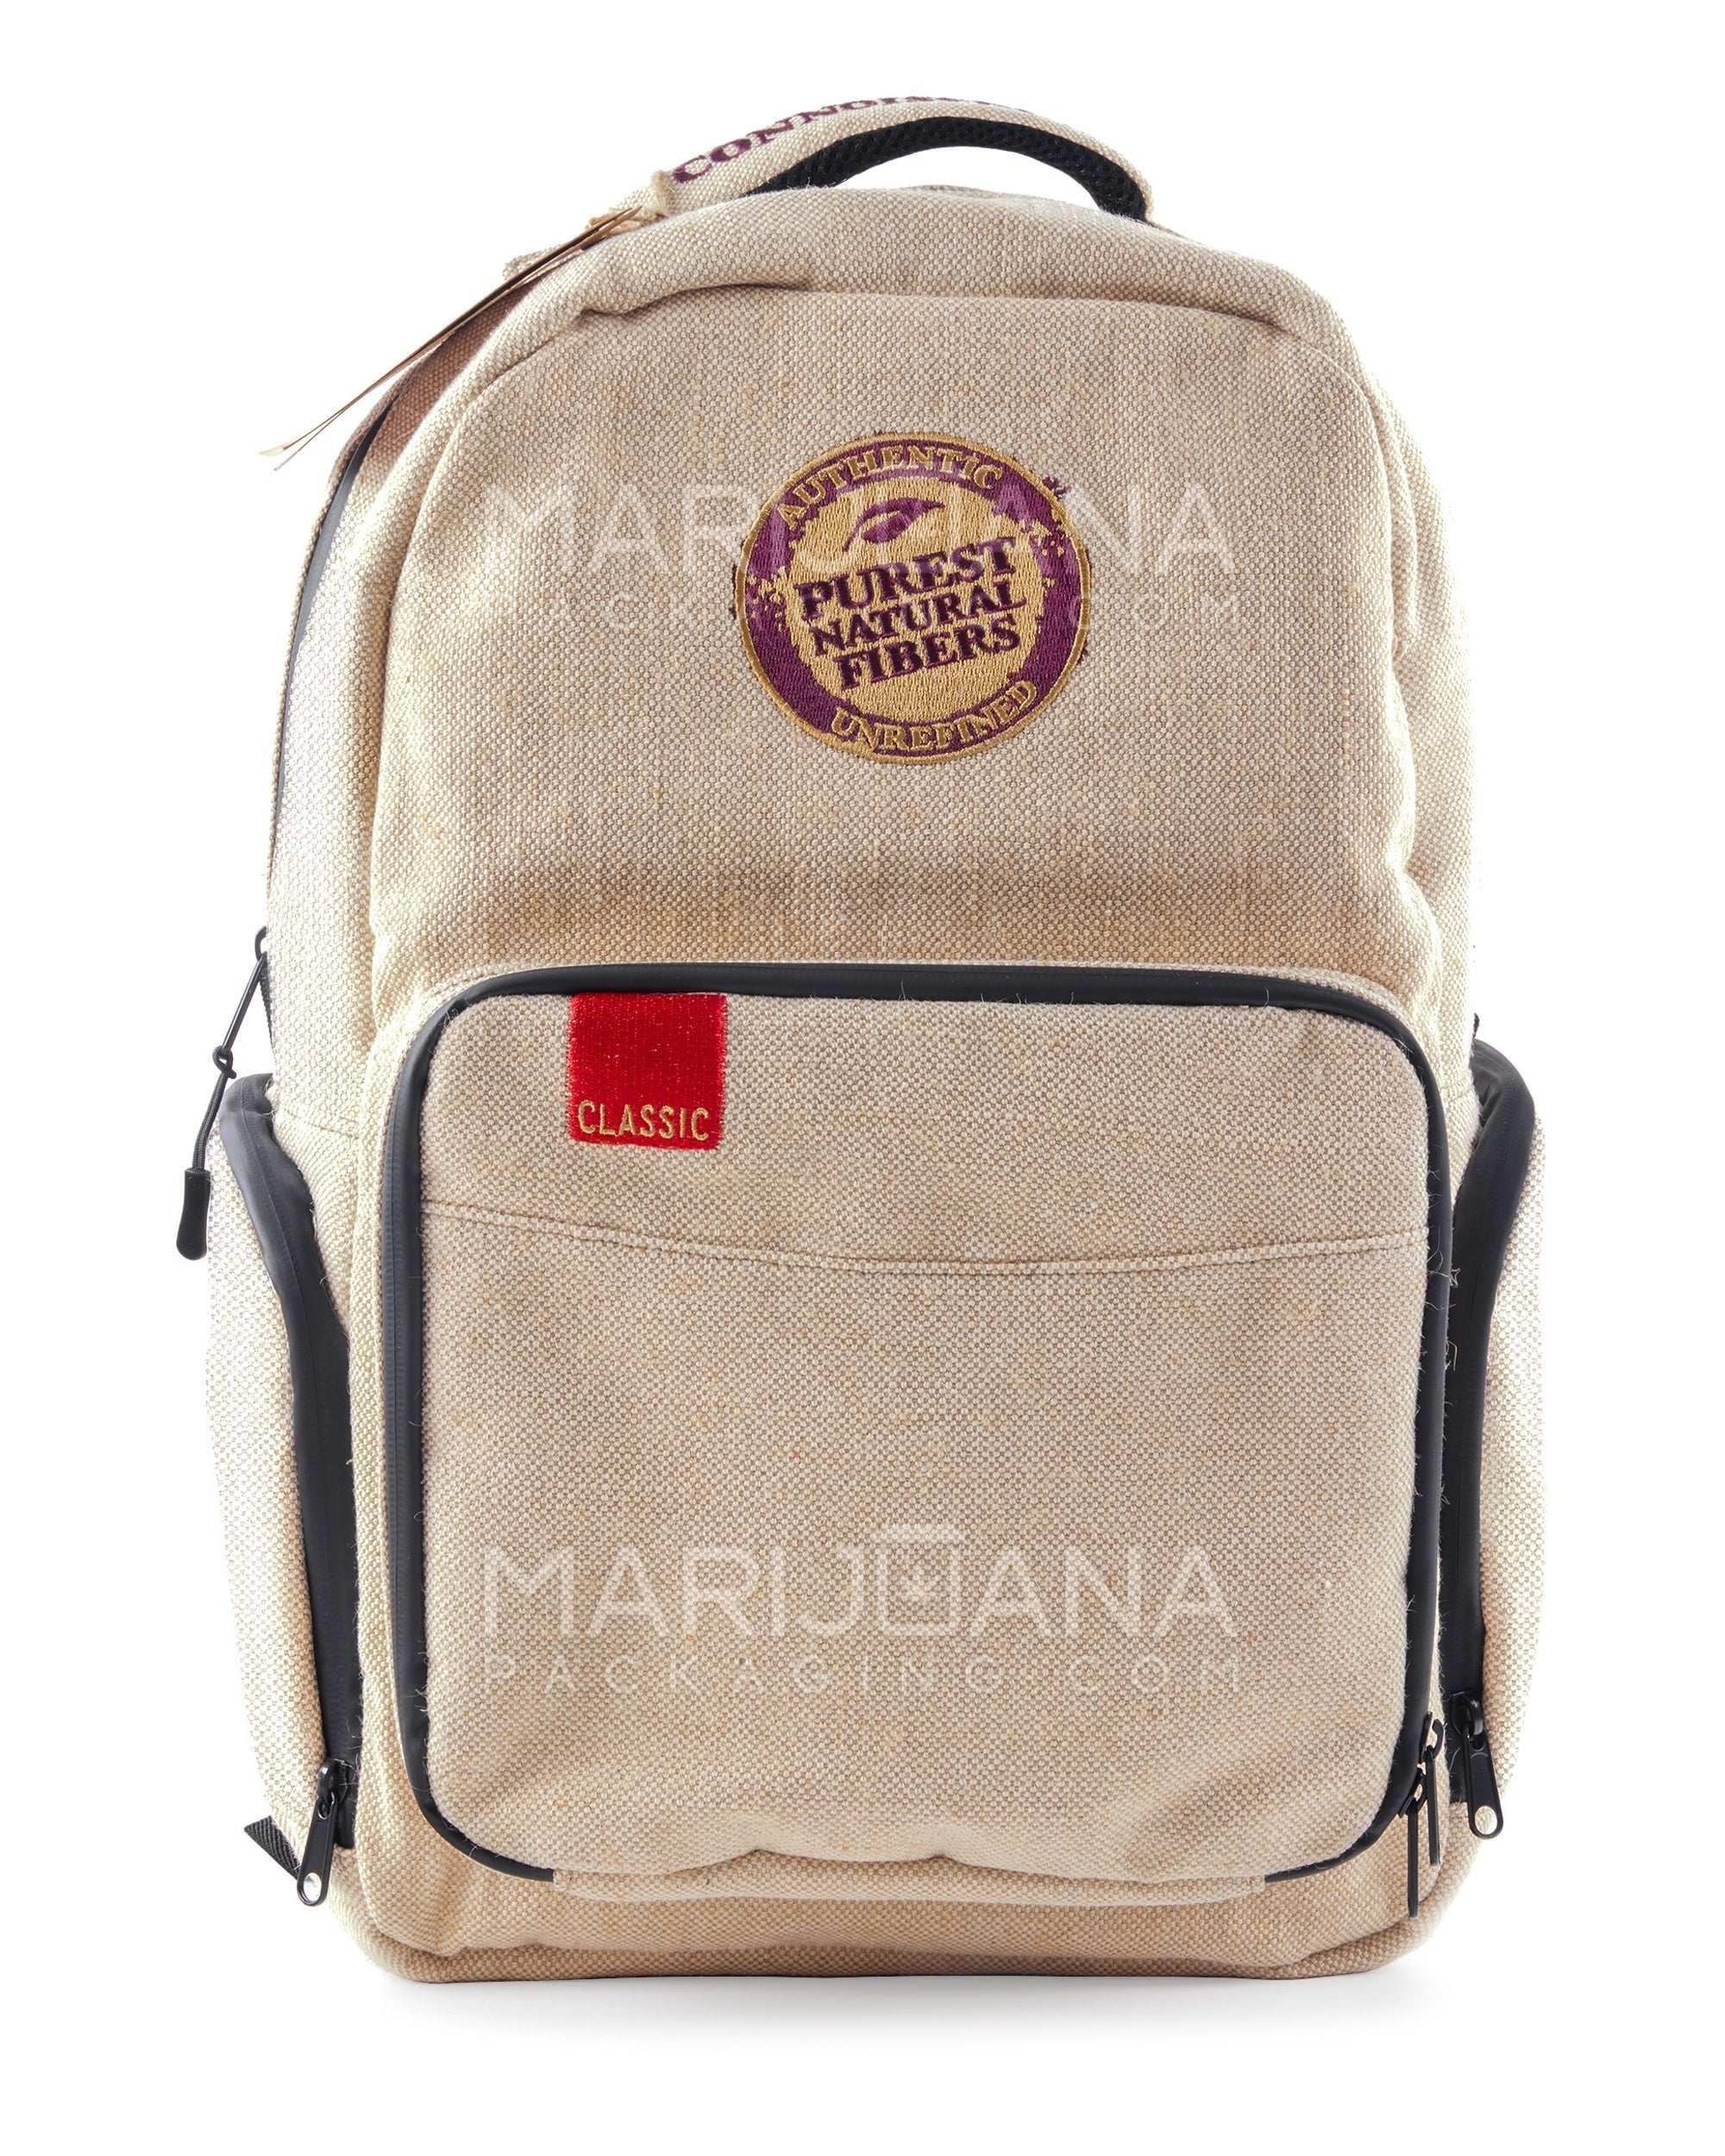 RAW | Smell Proof Rolling Papers Burlap Backpack - 1